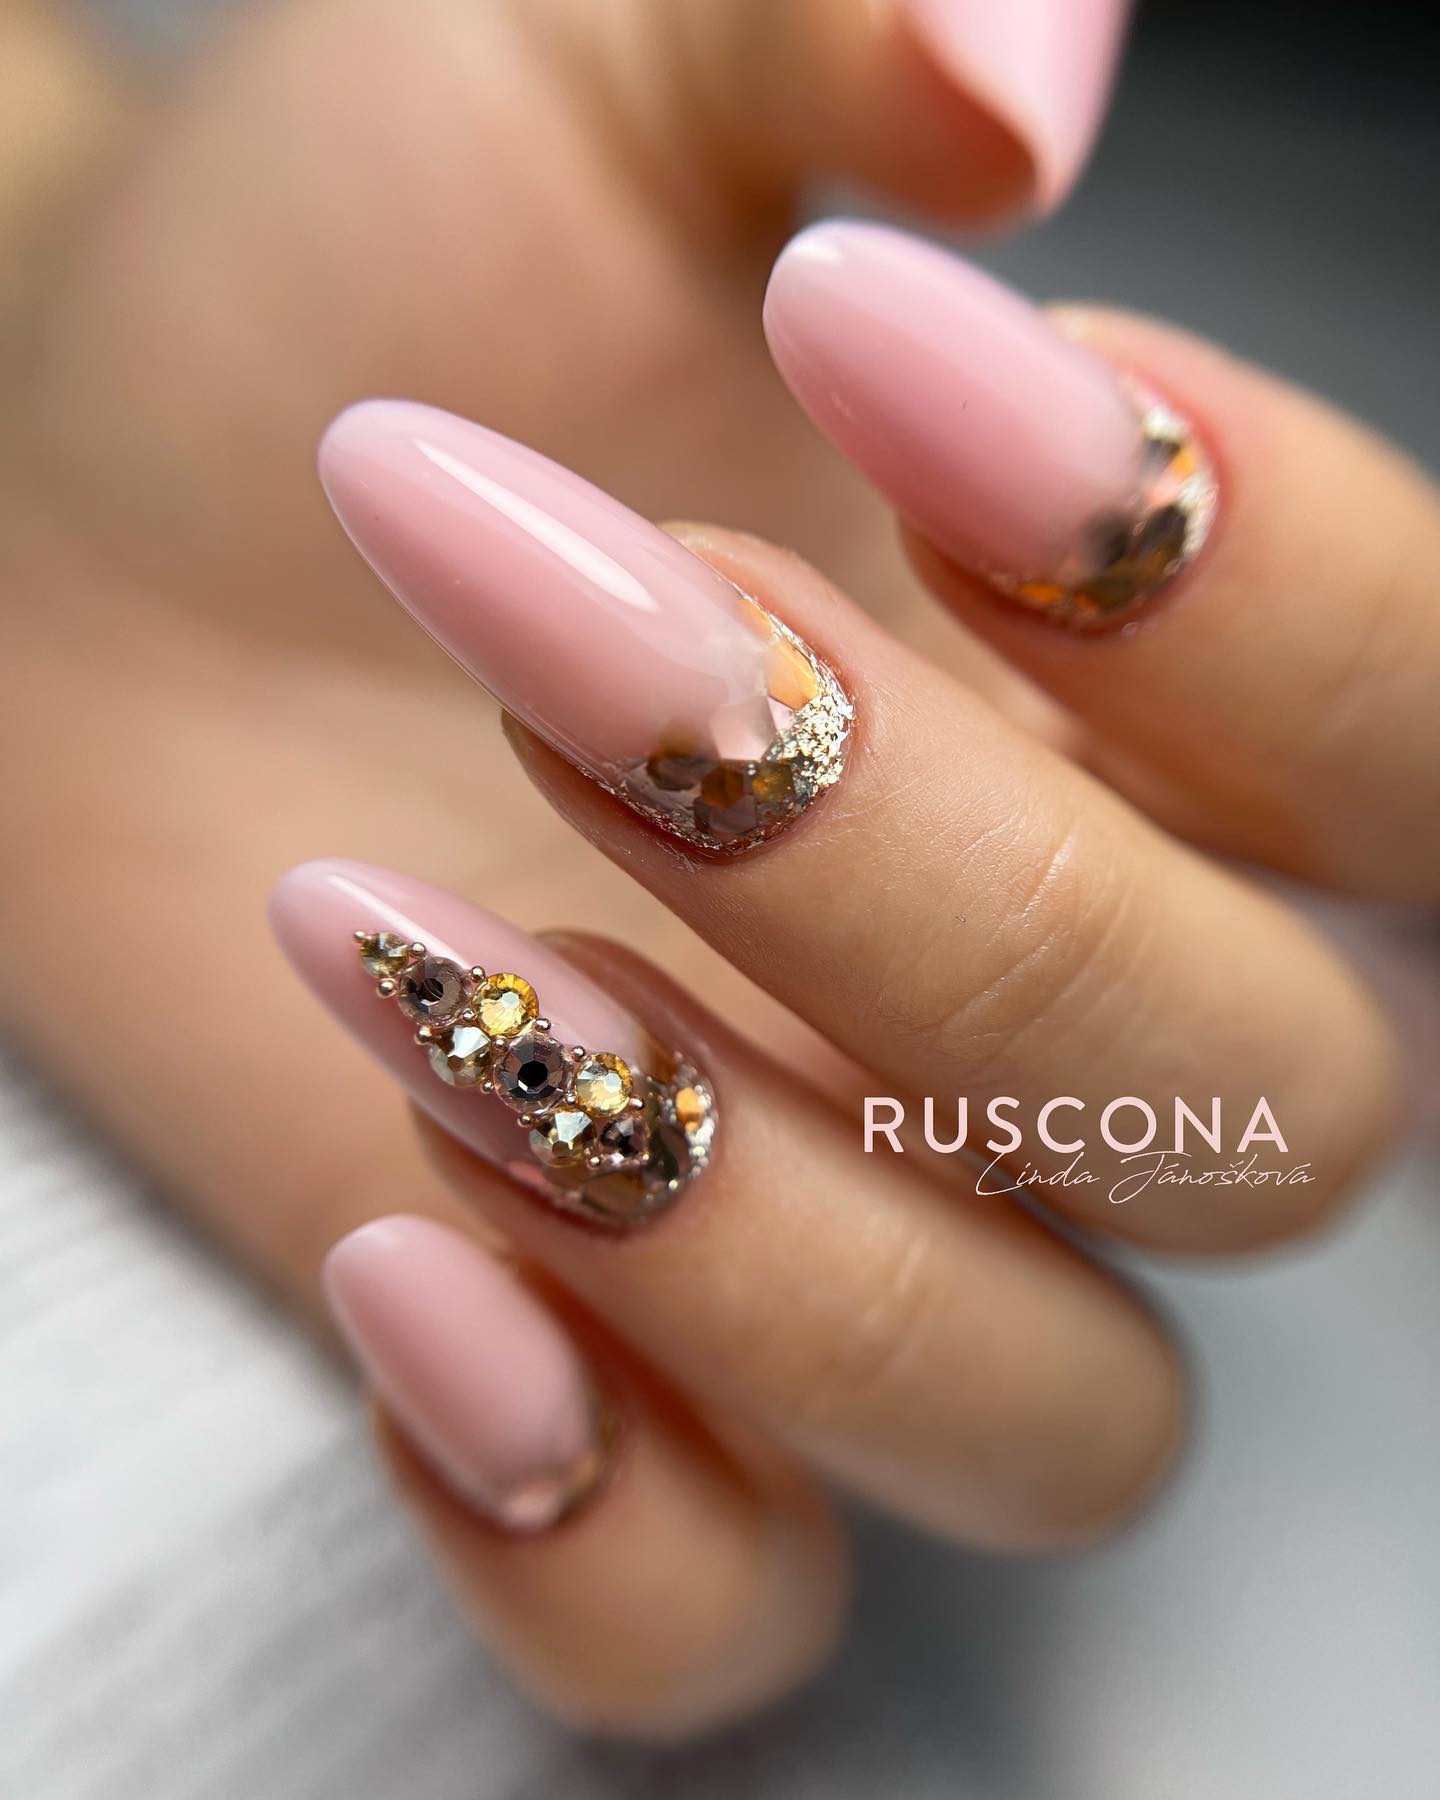 Nude shades and this gemstone detail will look feminine and dramatic. Show this mani off for formal events where you wish to fully shine!